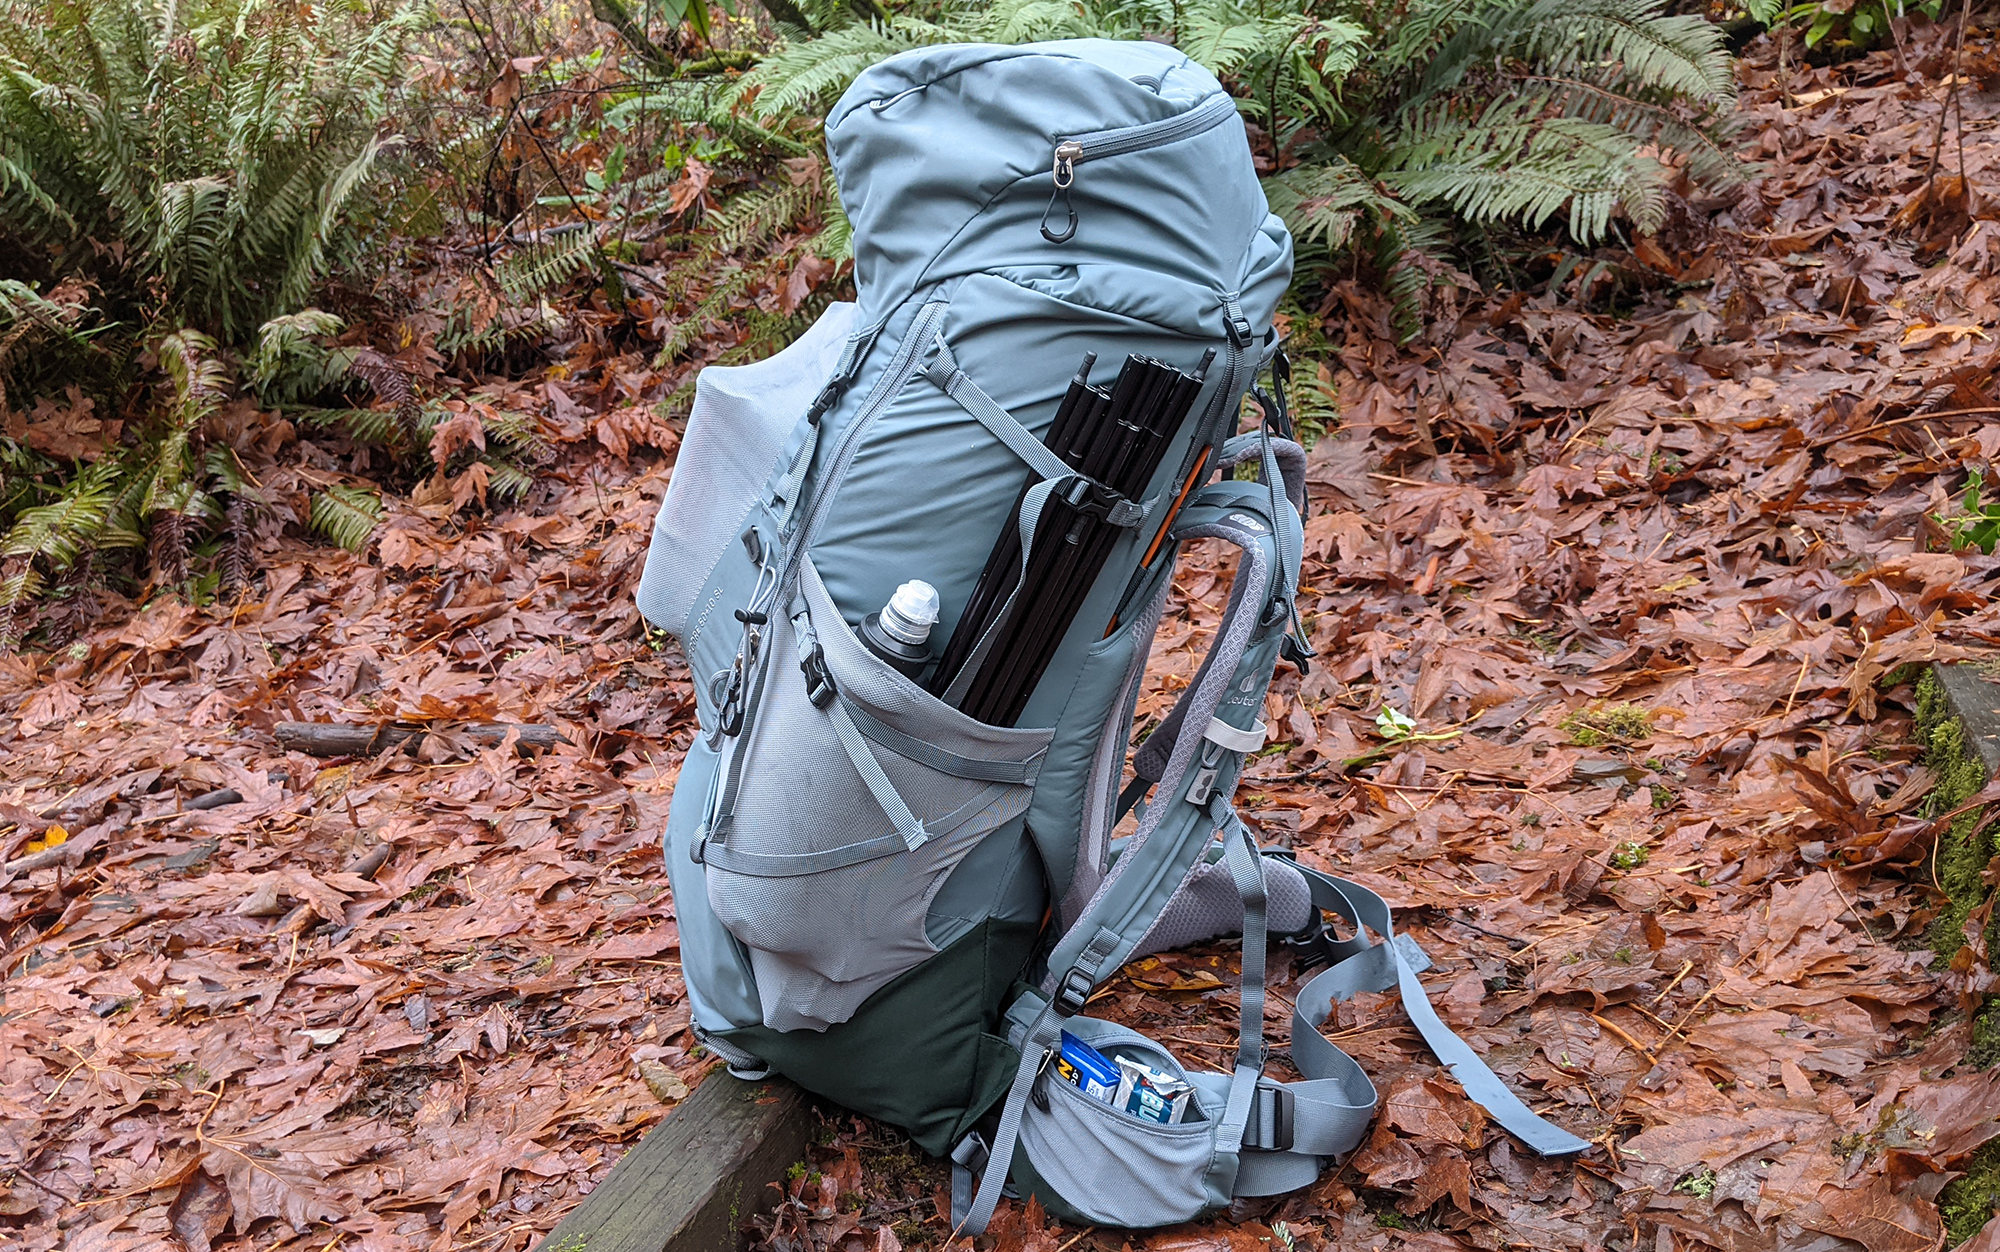 The slight curve of the Deuter Aircontactâs back panel provided meaningful airflow, but the additional pressure may be uncomfortable for women carrying heavier loads.